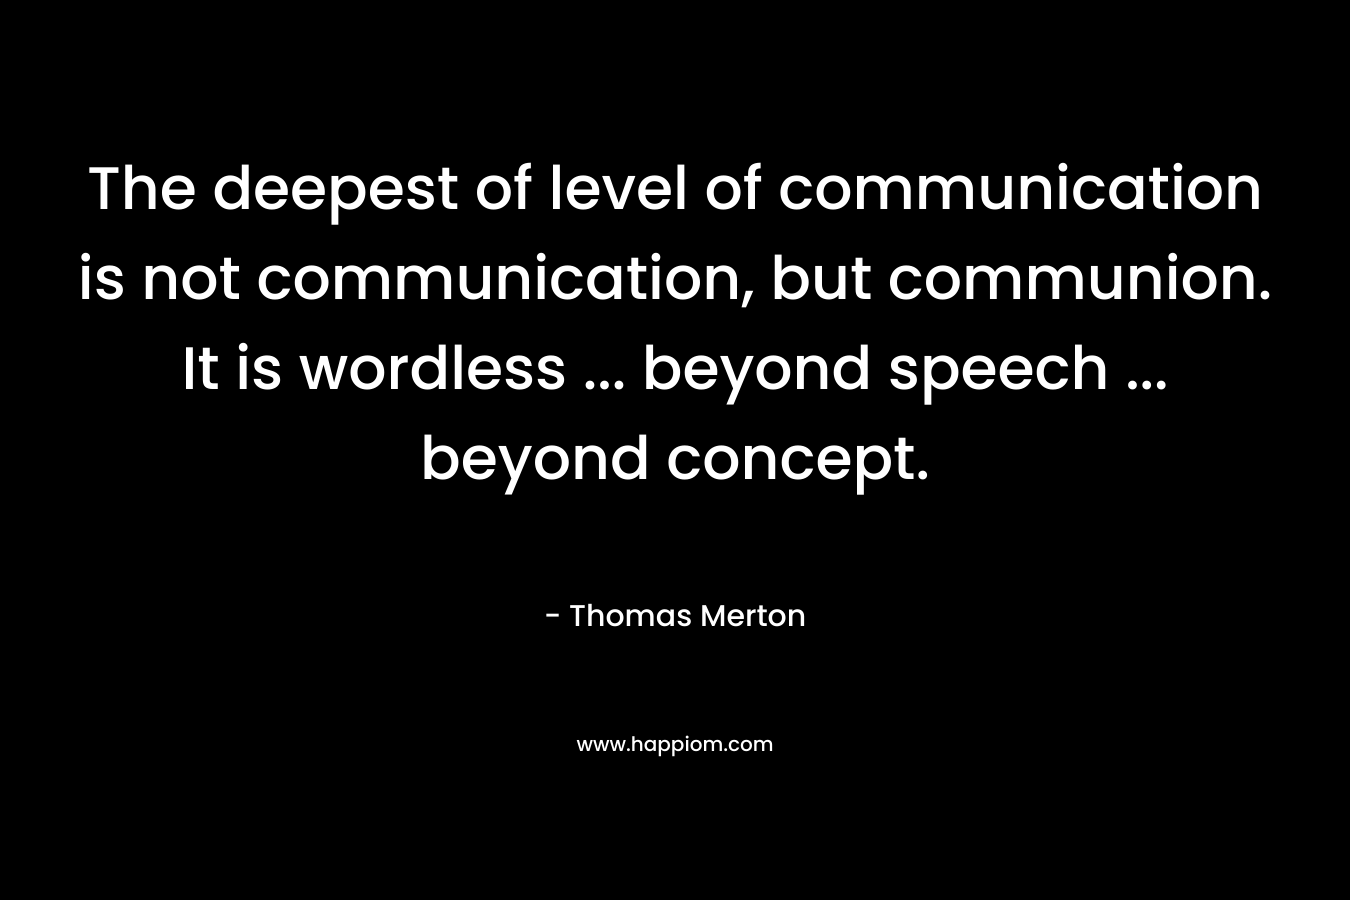 The deepest of level of communication is not communication, but communion. It is wordless … beyond speech … beyond concept. – Thomas Merton